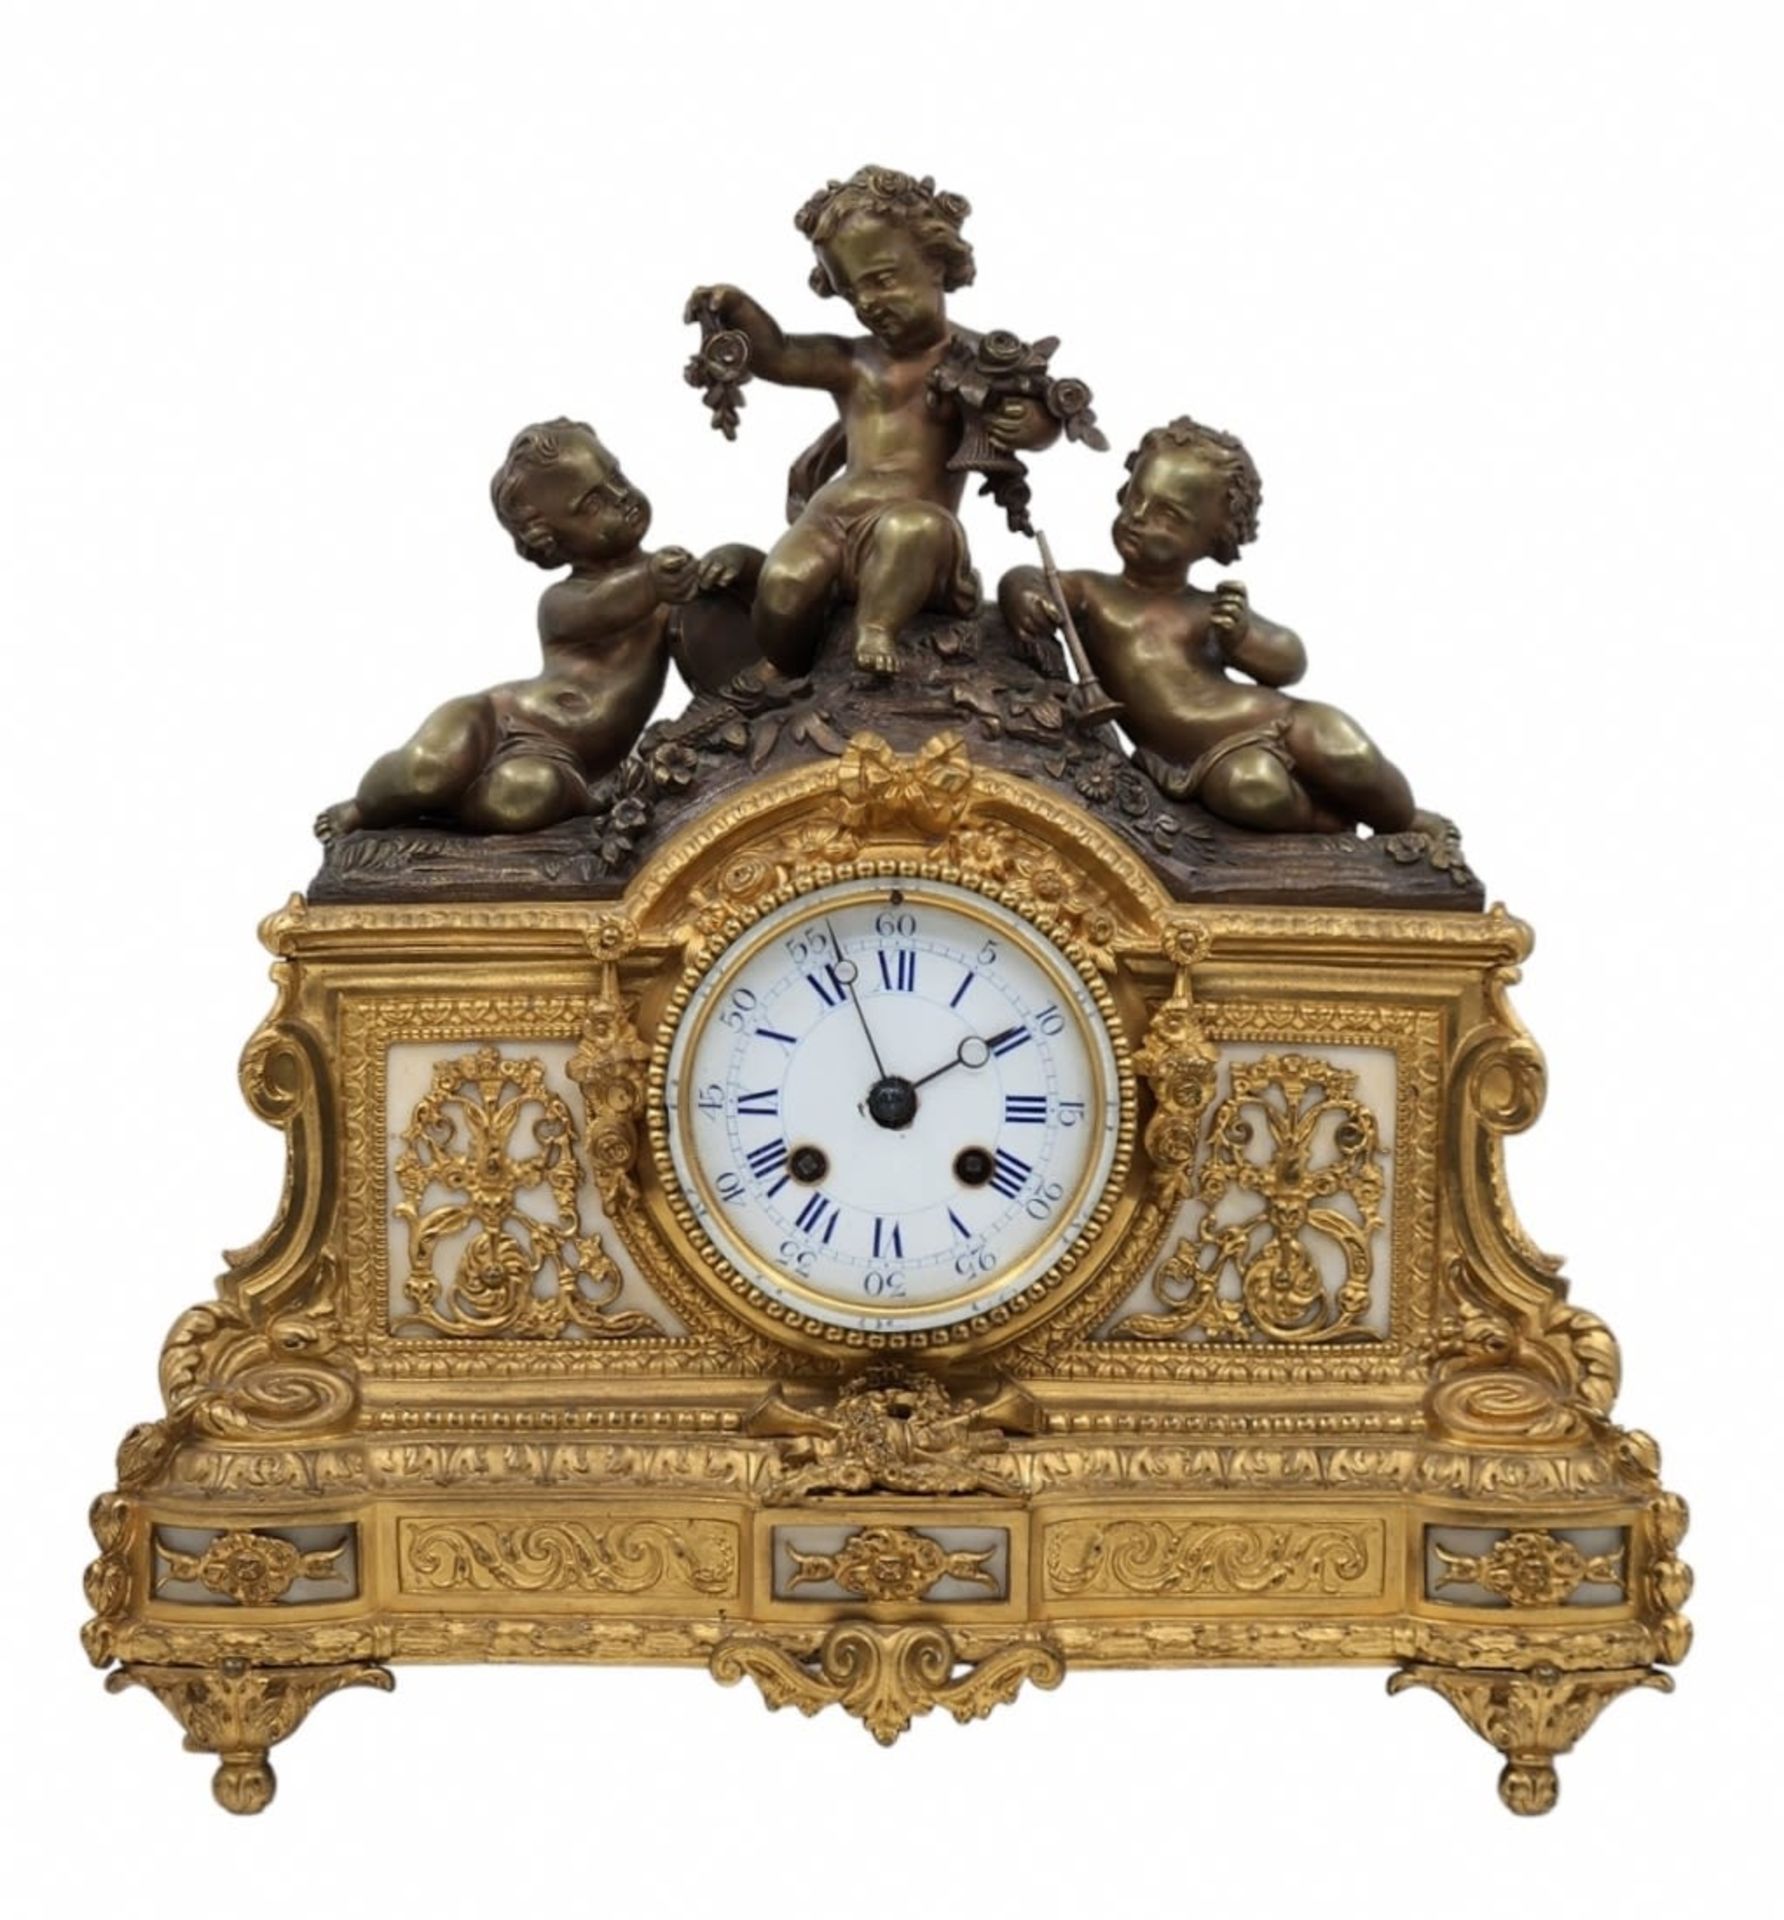 Antique French mantle clock, from the 19th century, made of bronze and white marble, the head is